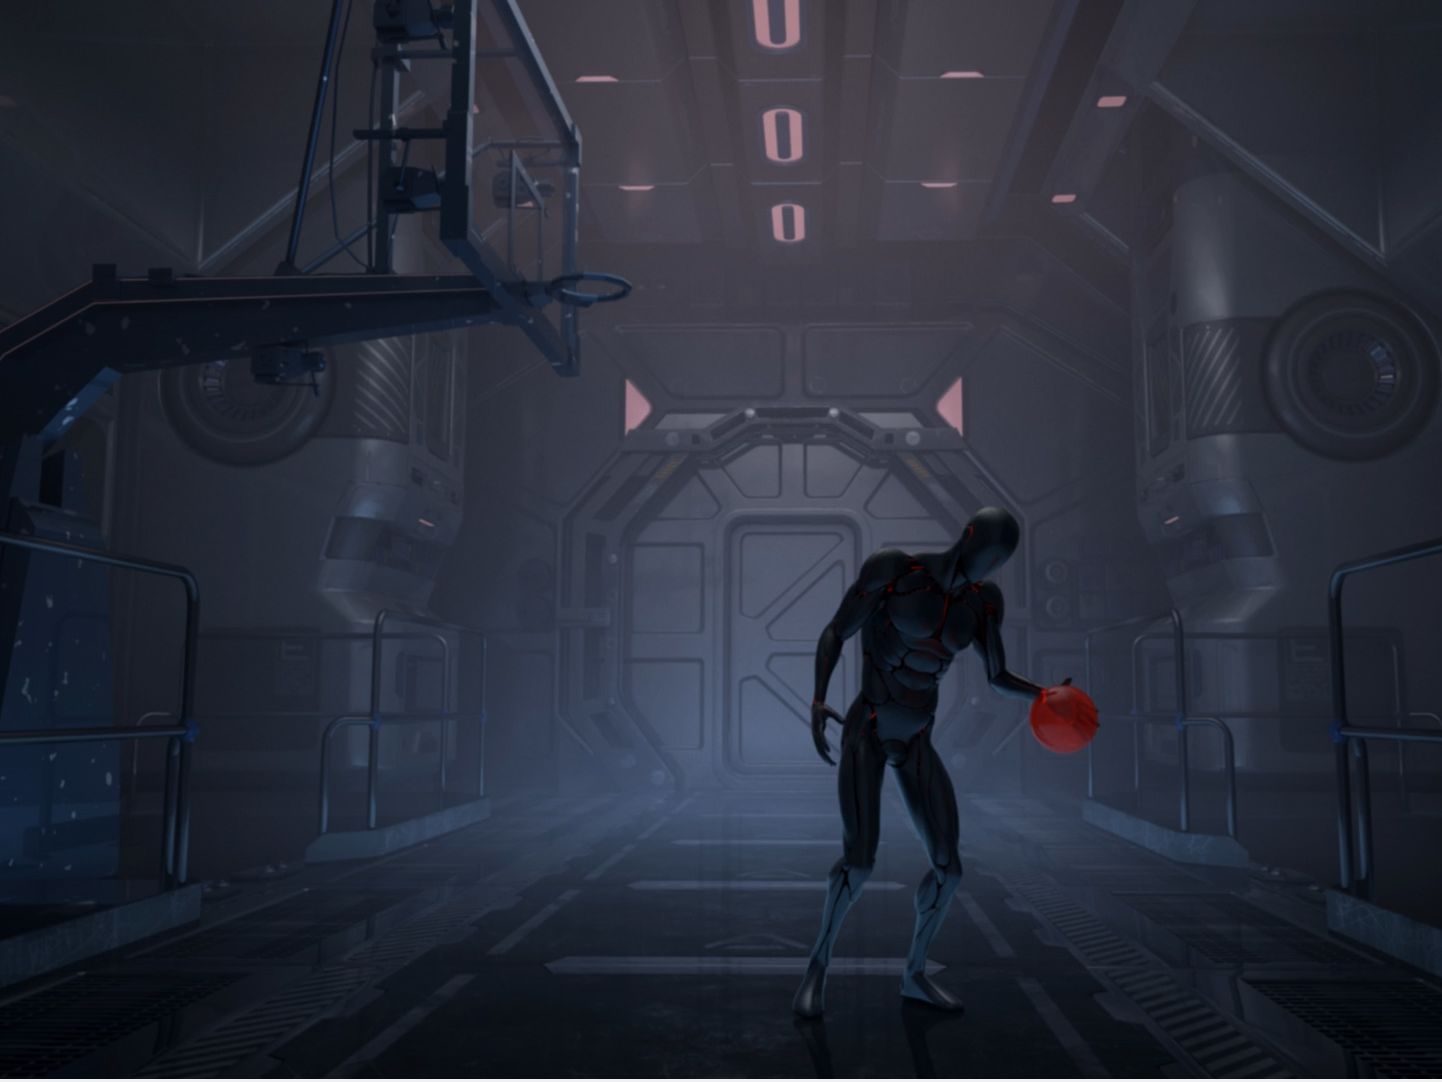 Computer animated cyborg character playing basketball in a futuristic metal room.